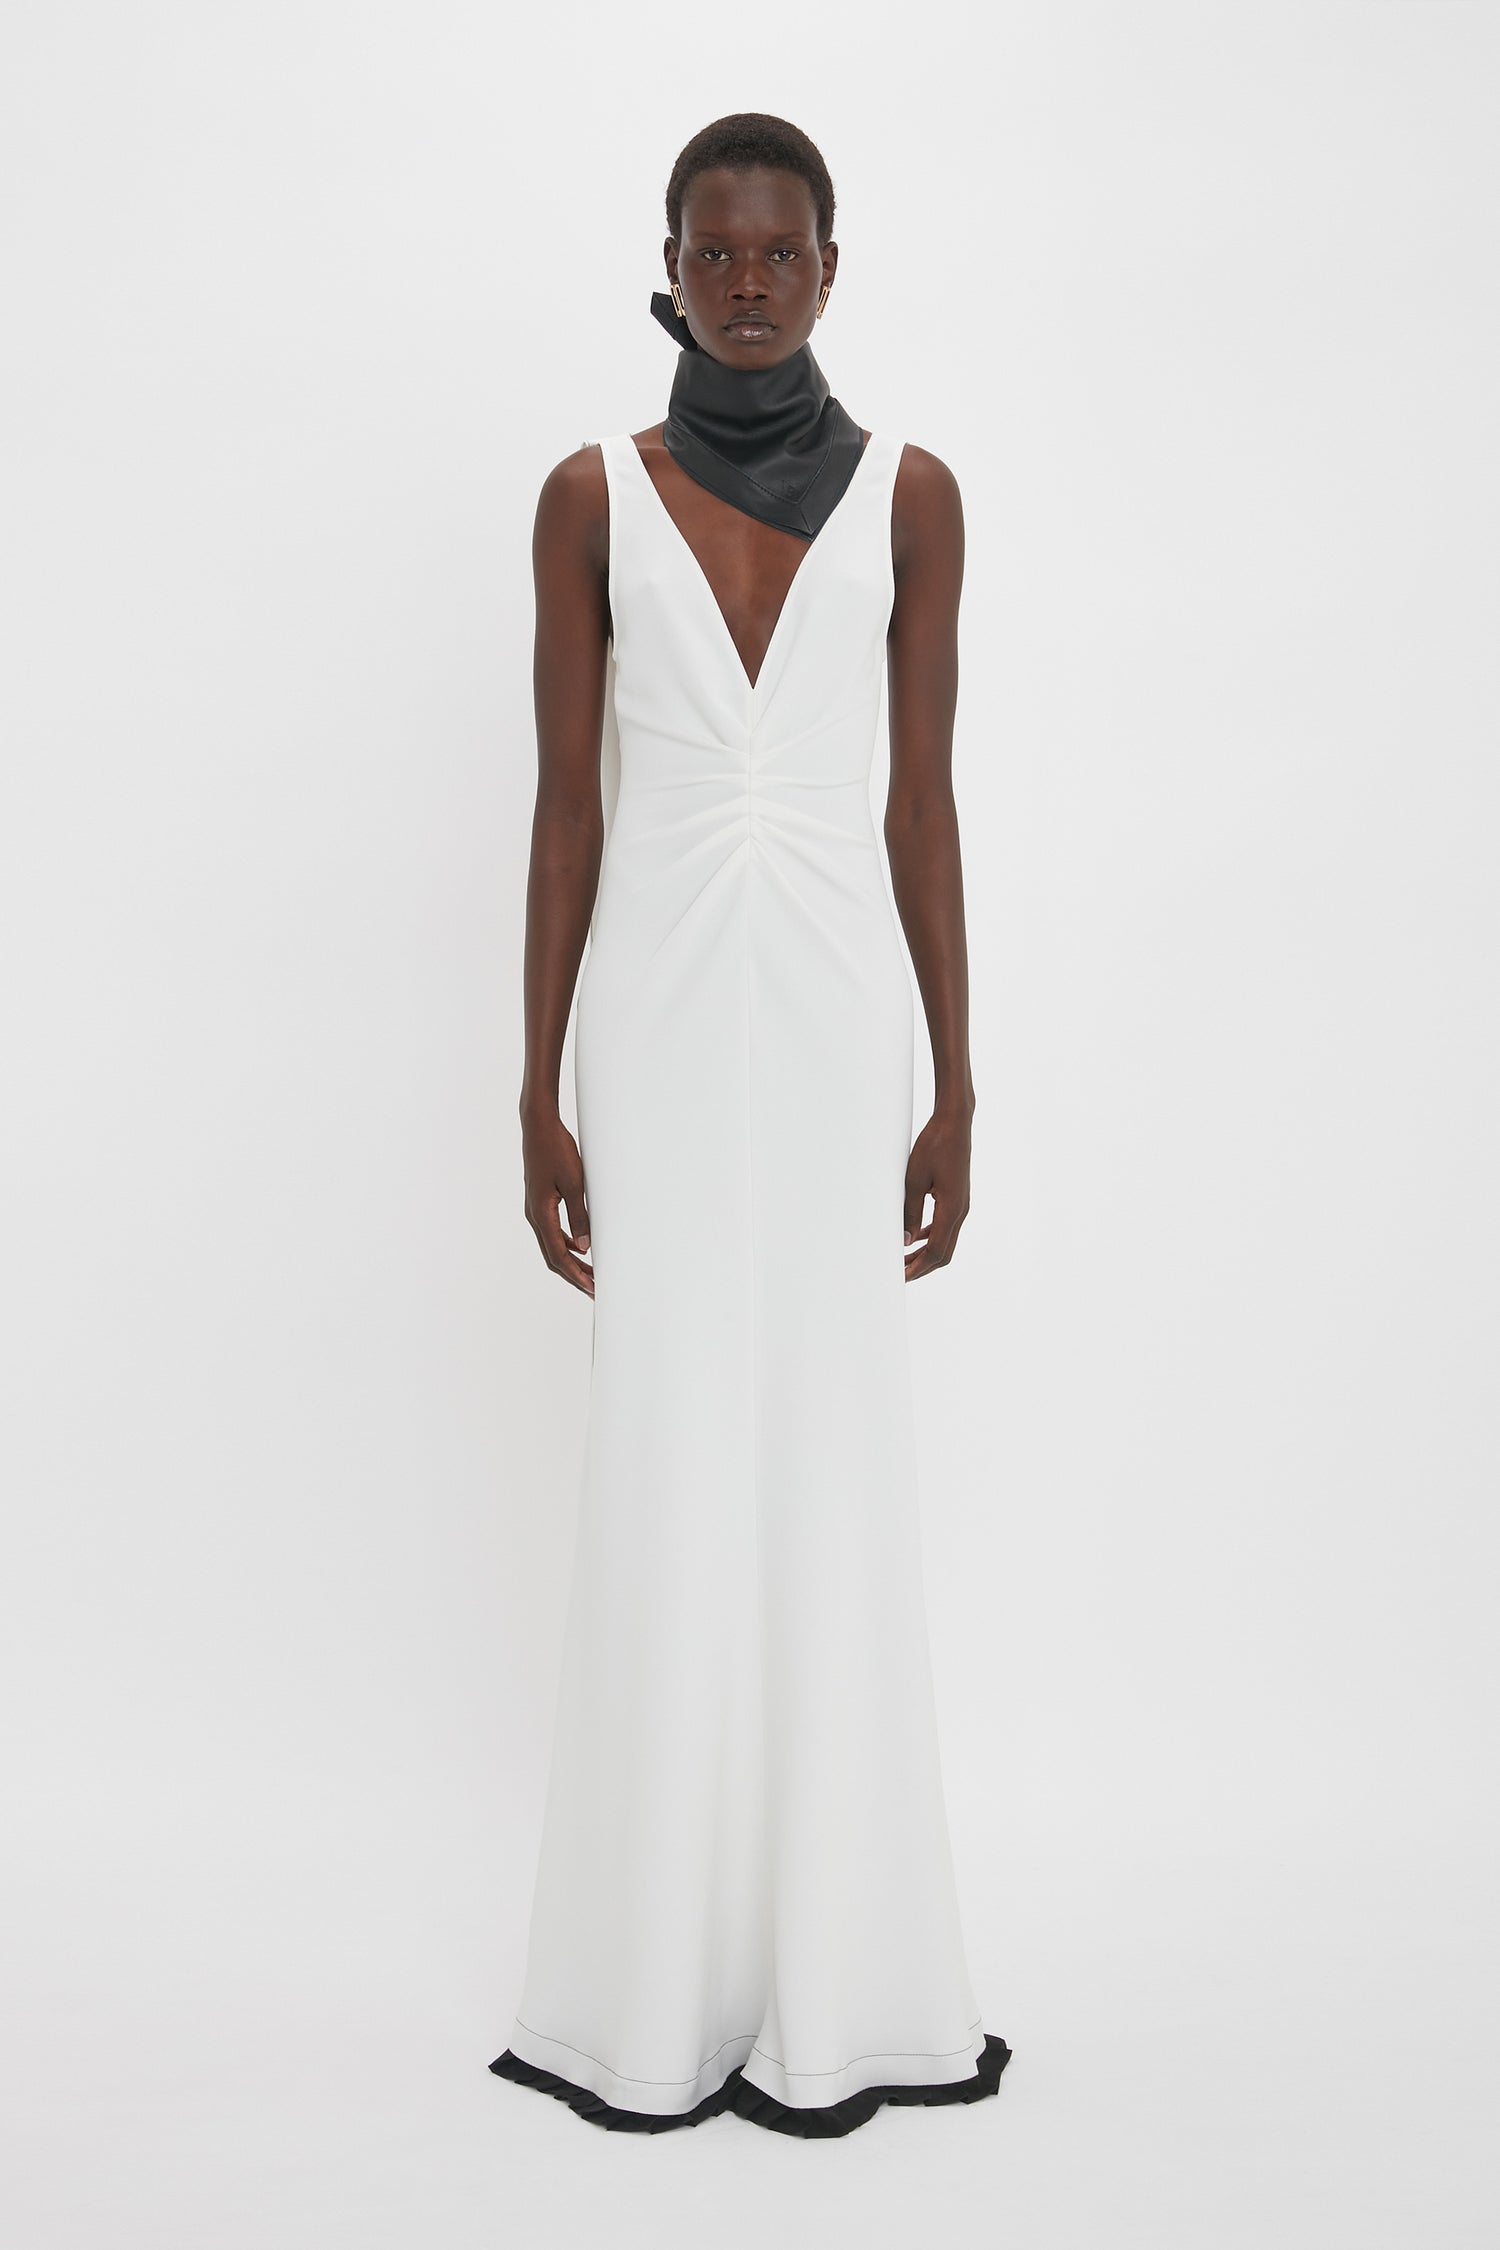 Person wearing an Exclusive V-Neck Gathered Waist Floor-Length Gown In Ivory by Victoria Beckham with a black scarf around the neck, showcasing an hourglass silhouette, standing against a plain white background.